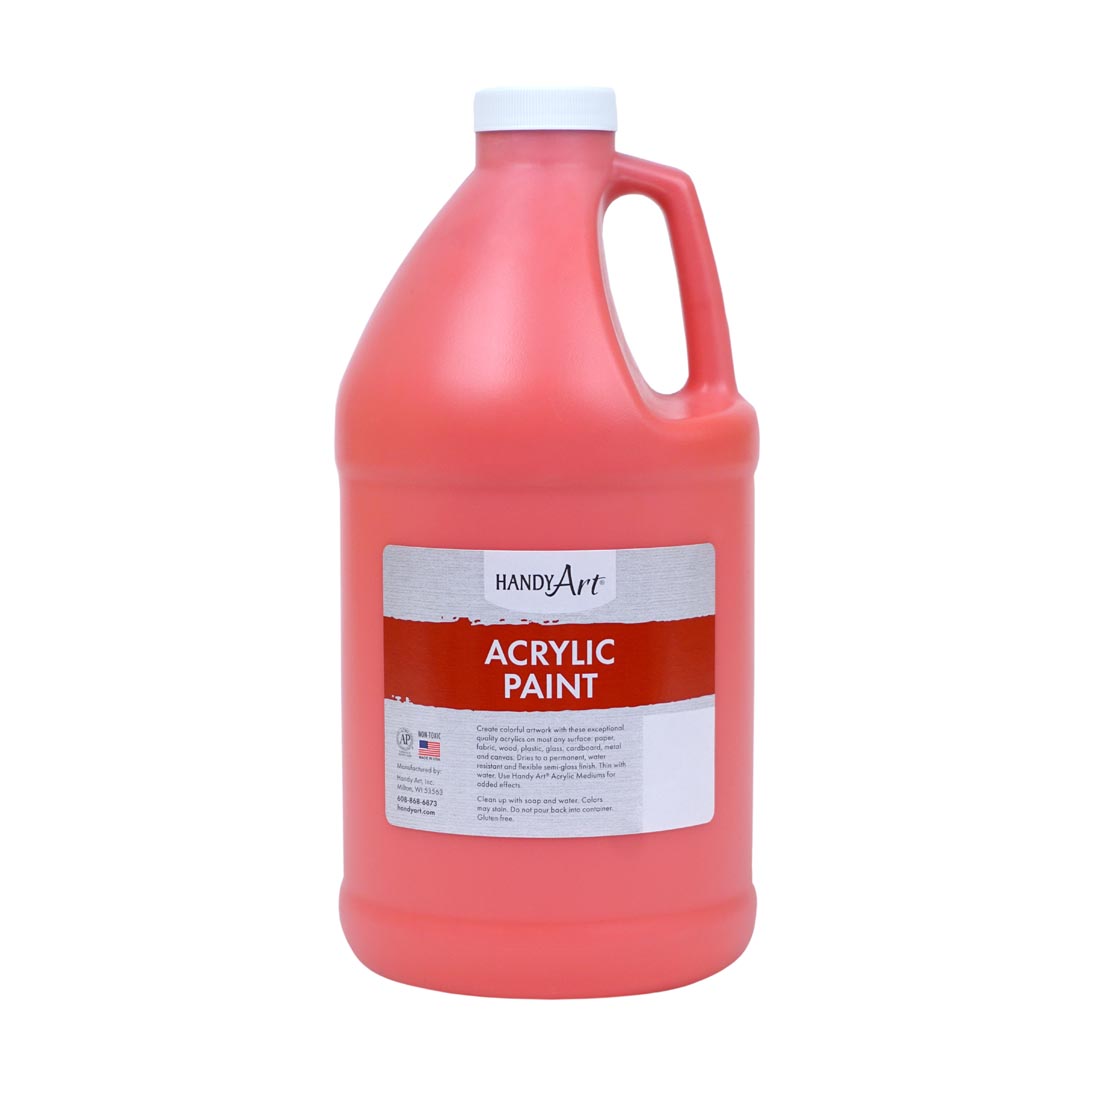 1/2 Gallon of Phthalo Red Handy Art Acrylic Paint